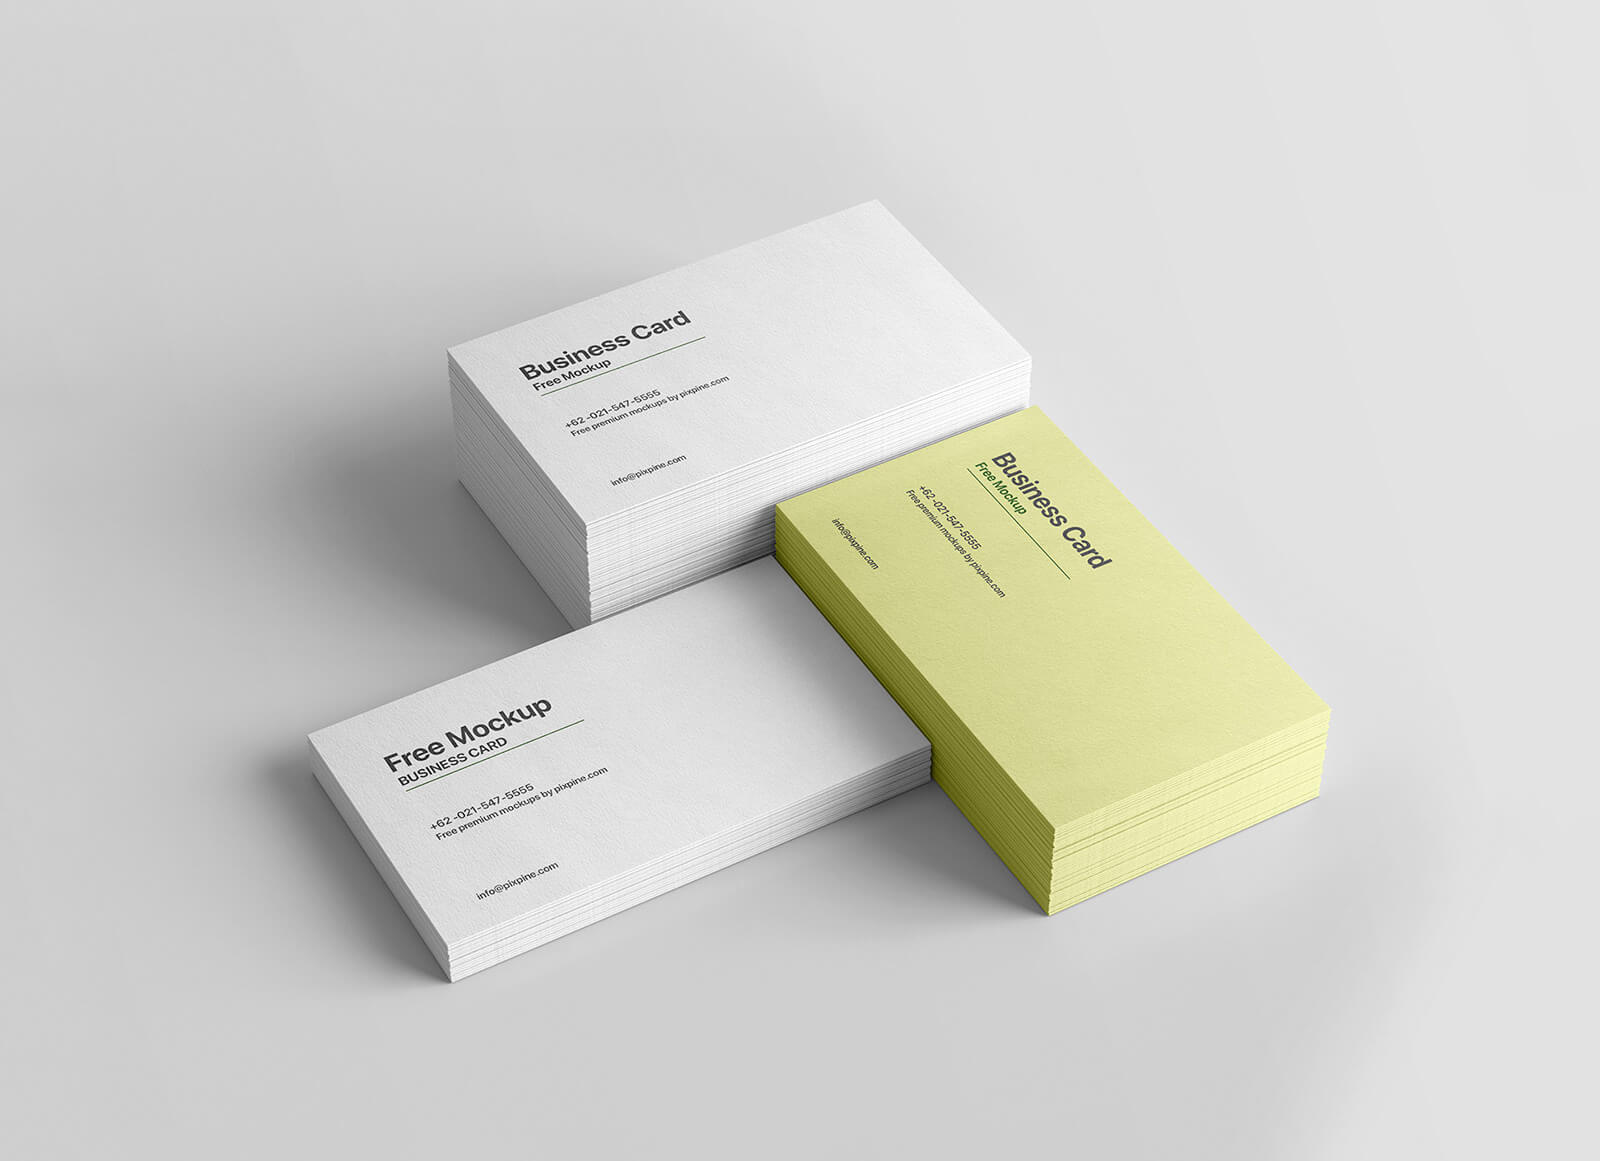 Stacked Textured Business Card Mockup